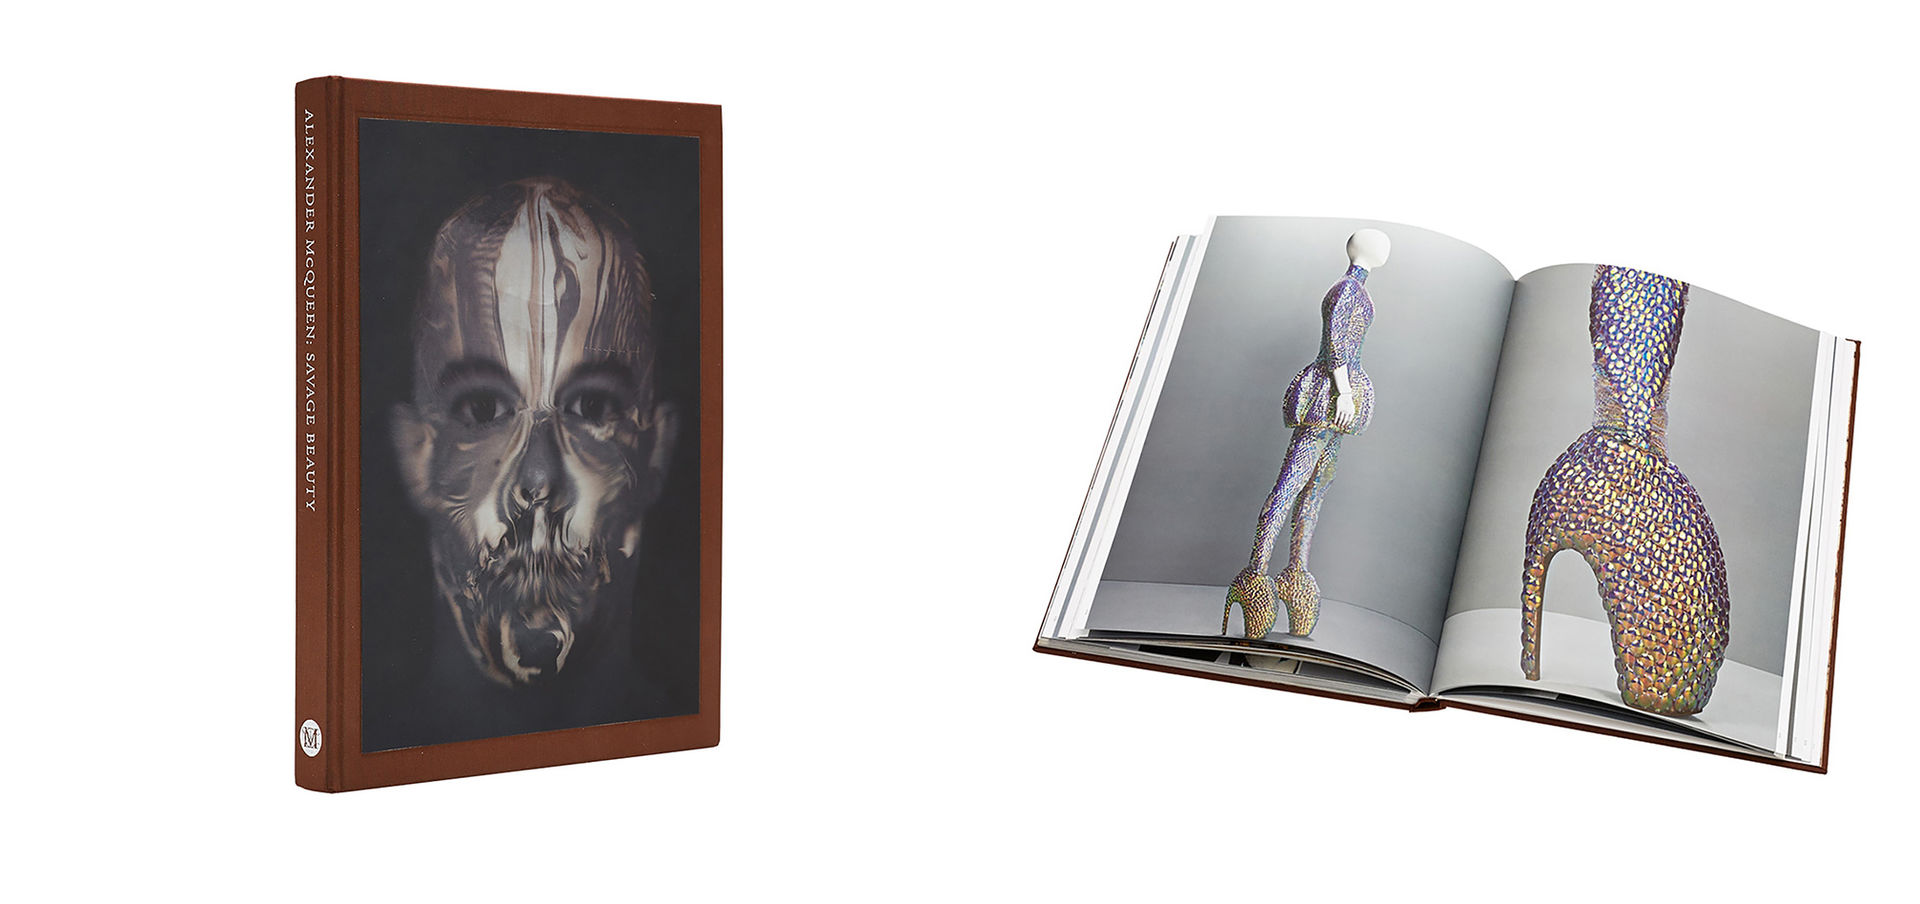 A picture of a book depicting fashion designed by Alexander McQueen